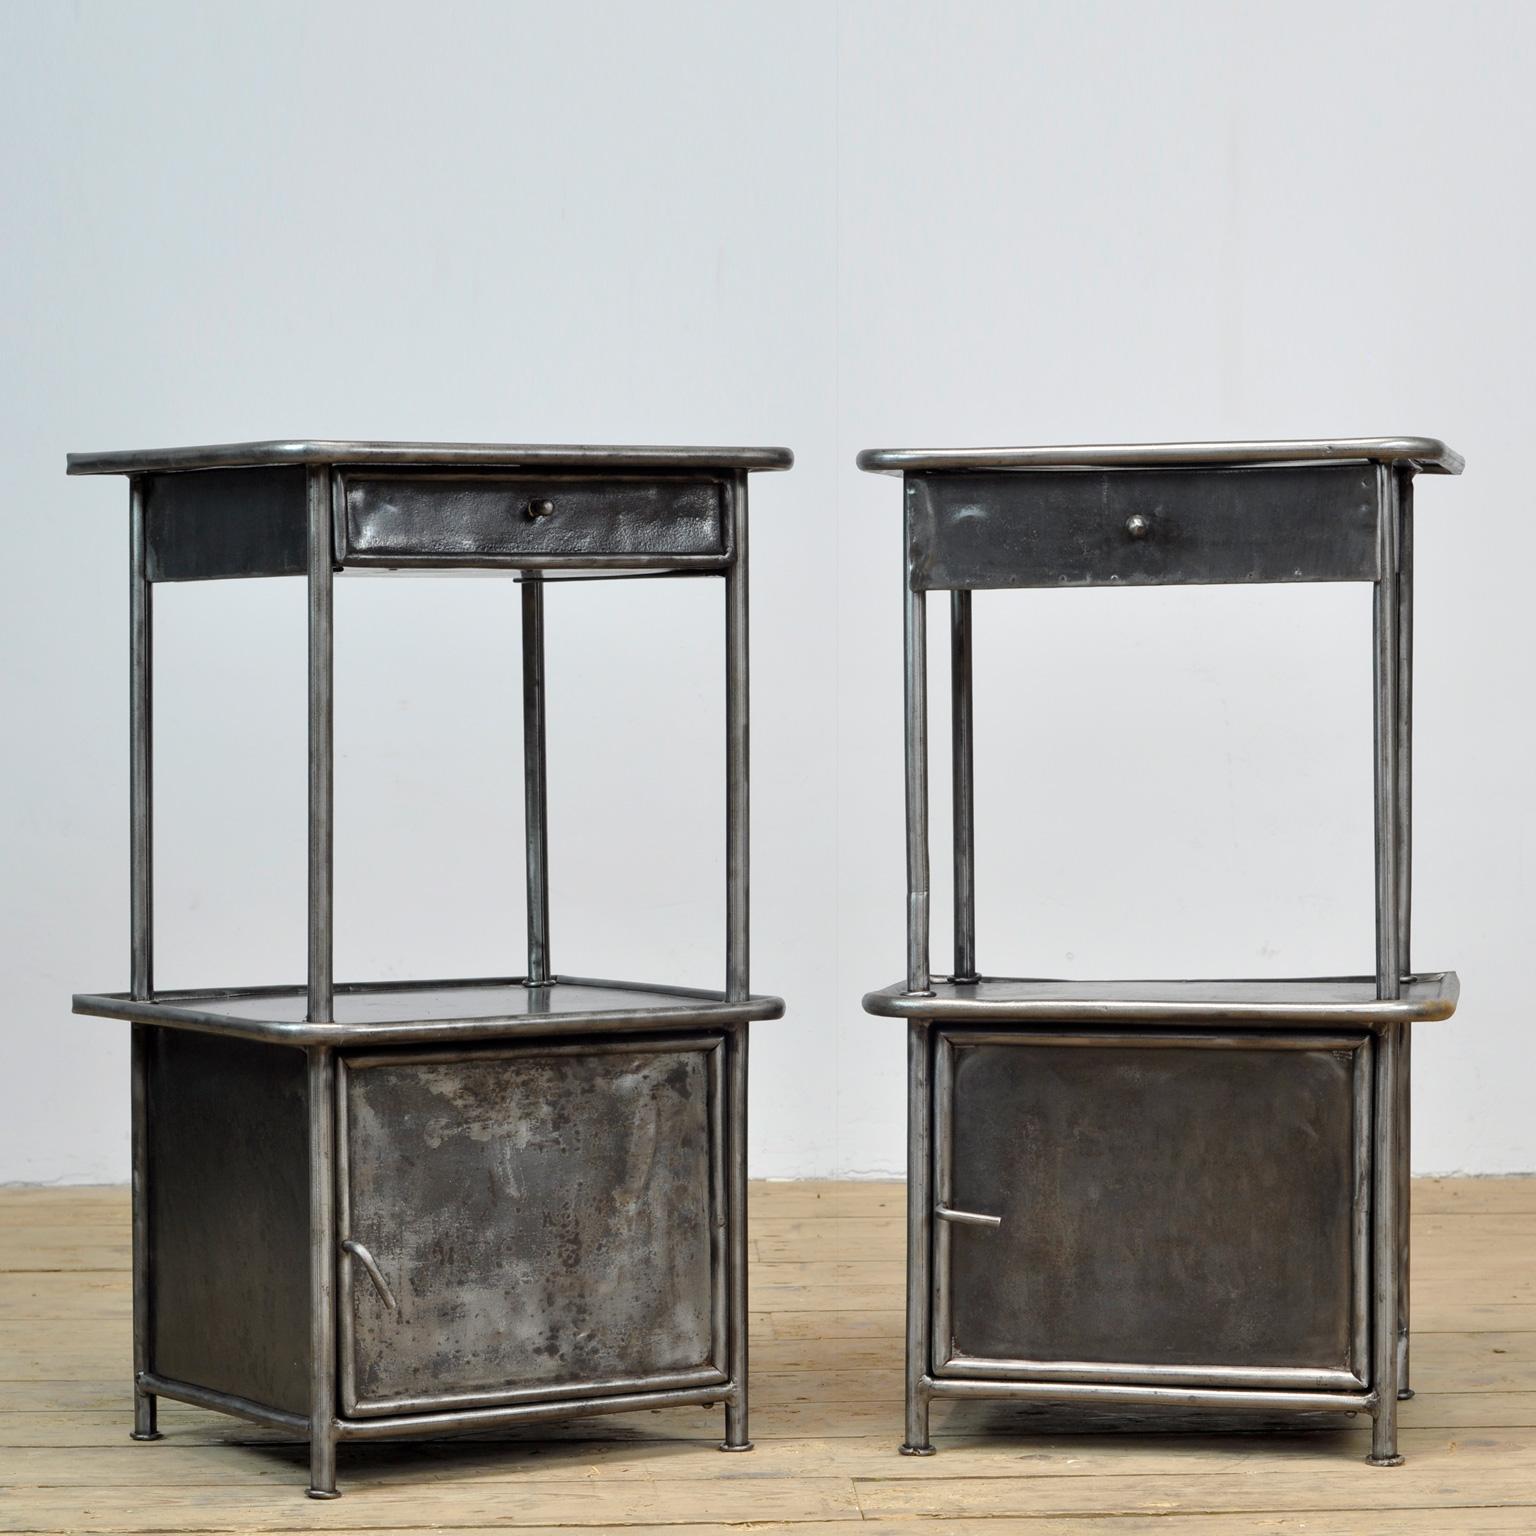 Set of iron polished hospital bedside cabinets. With one drawer. Produced in the 1920's.